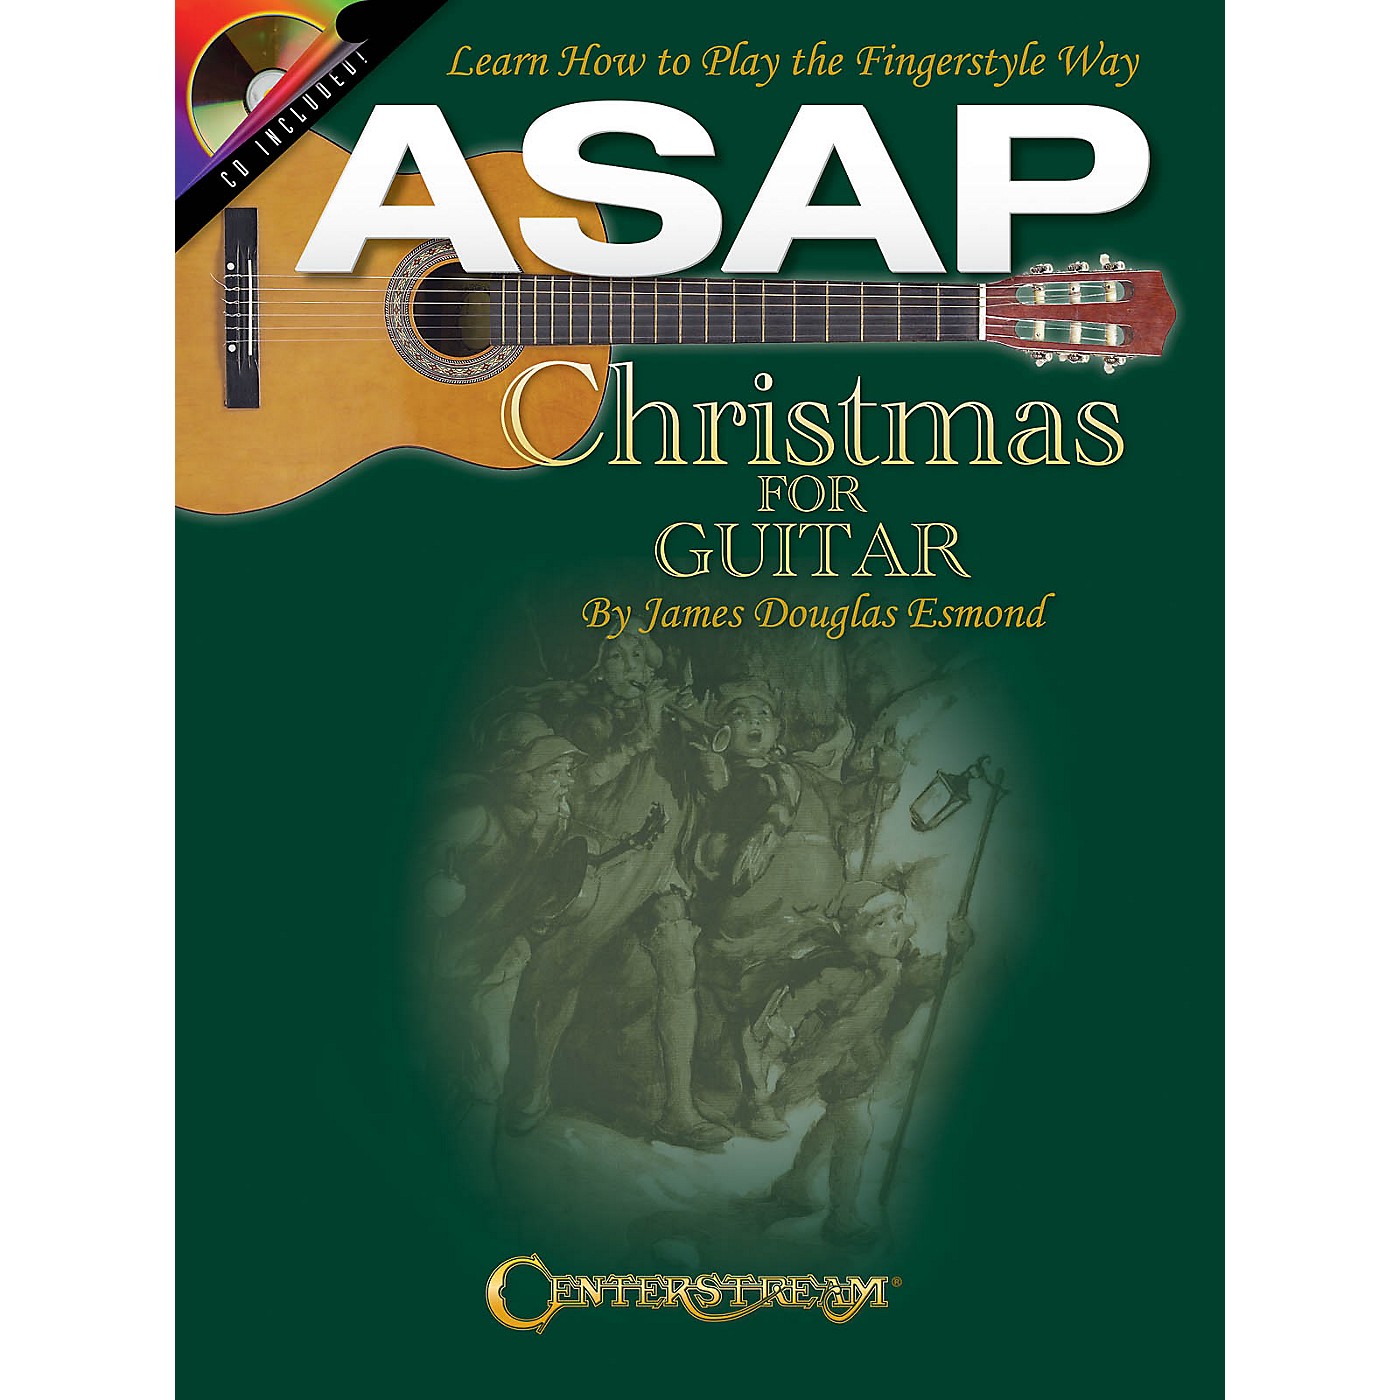 Centerstream Publishing ASAP Christmas for Guitar Guitar Series Softcover with CD Written by James Douglas Esmond thumbnail